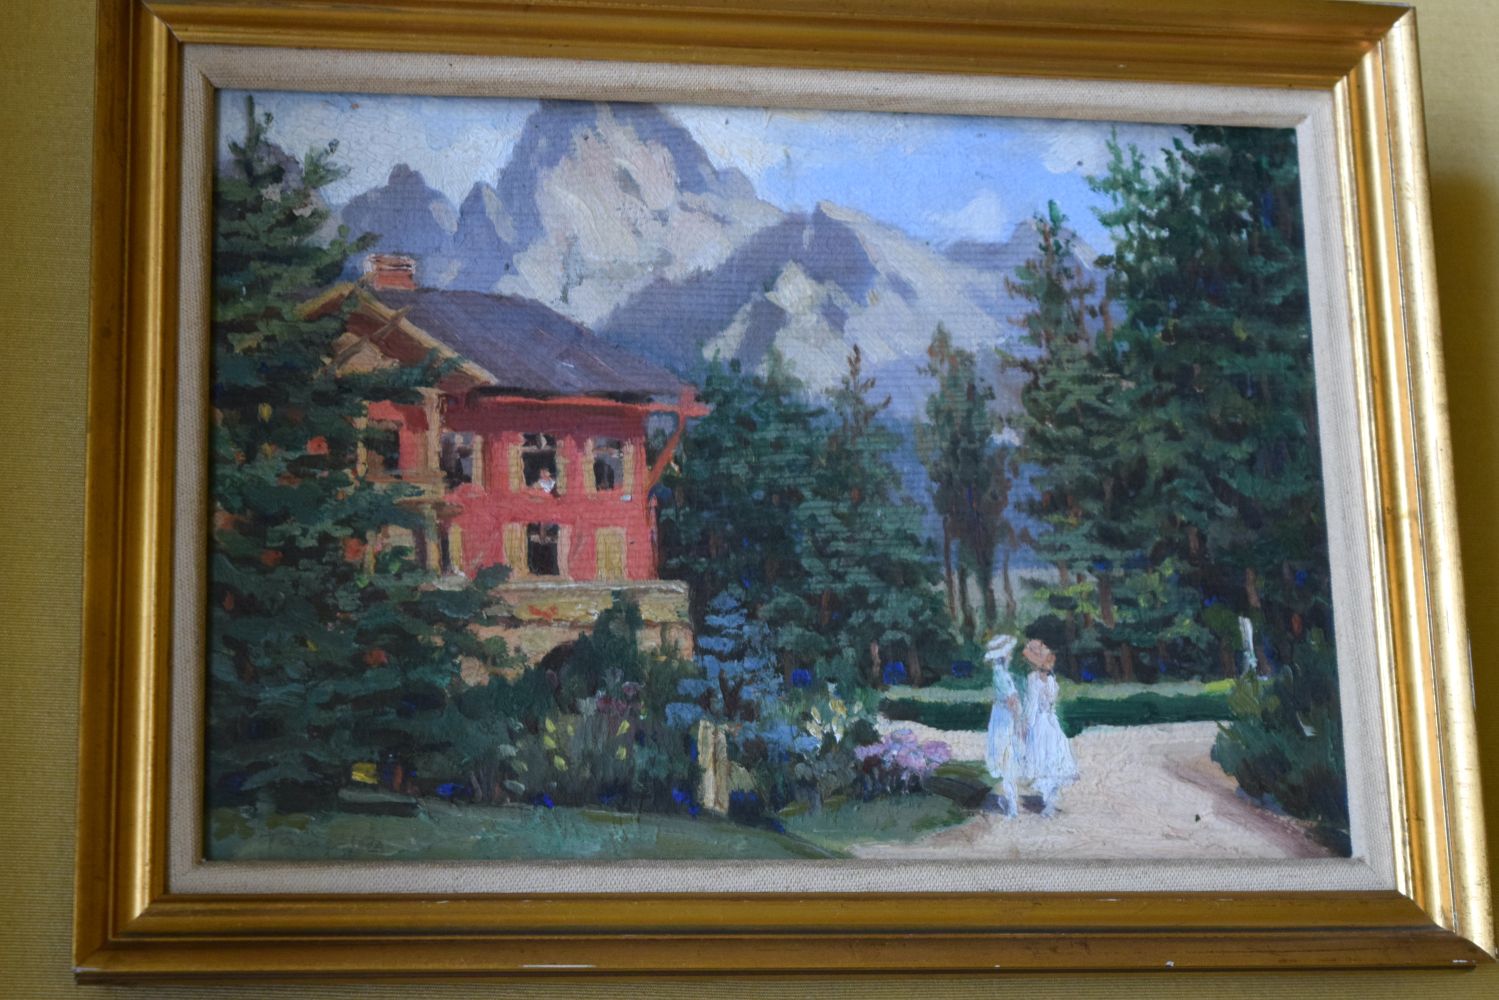 Hungarian School (20th Century) Geza, Pair of oil on canvas, Landscapes. Image 28 cm x 20 cm. - Image 4 of 5